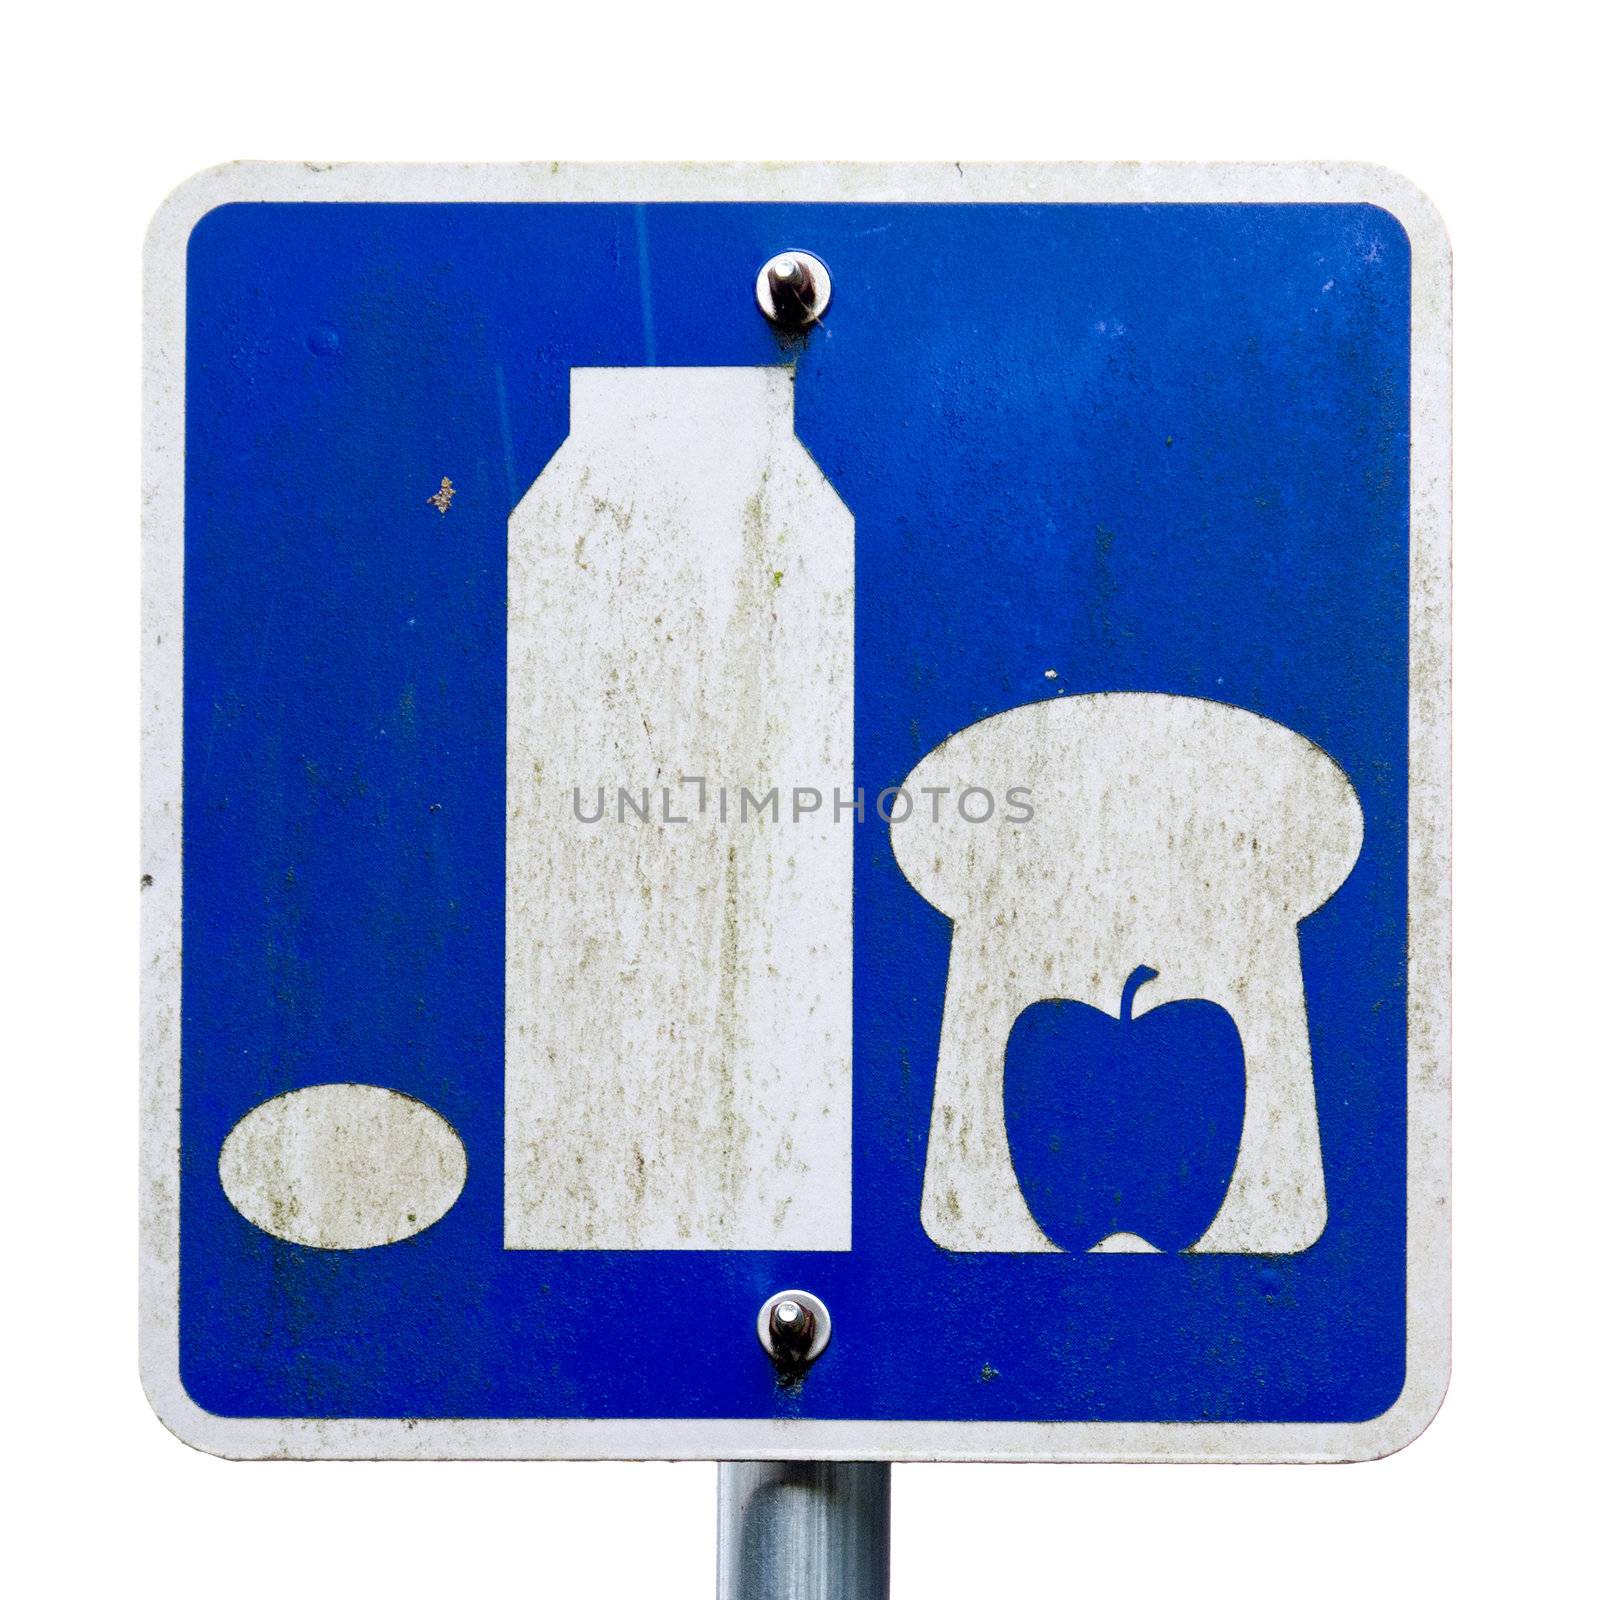 Weathered road sign picturing basic food staple such as milk bread apple and egg